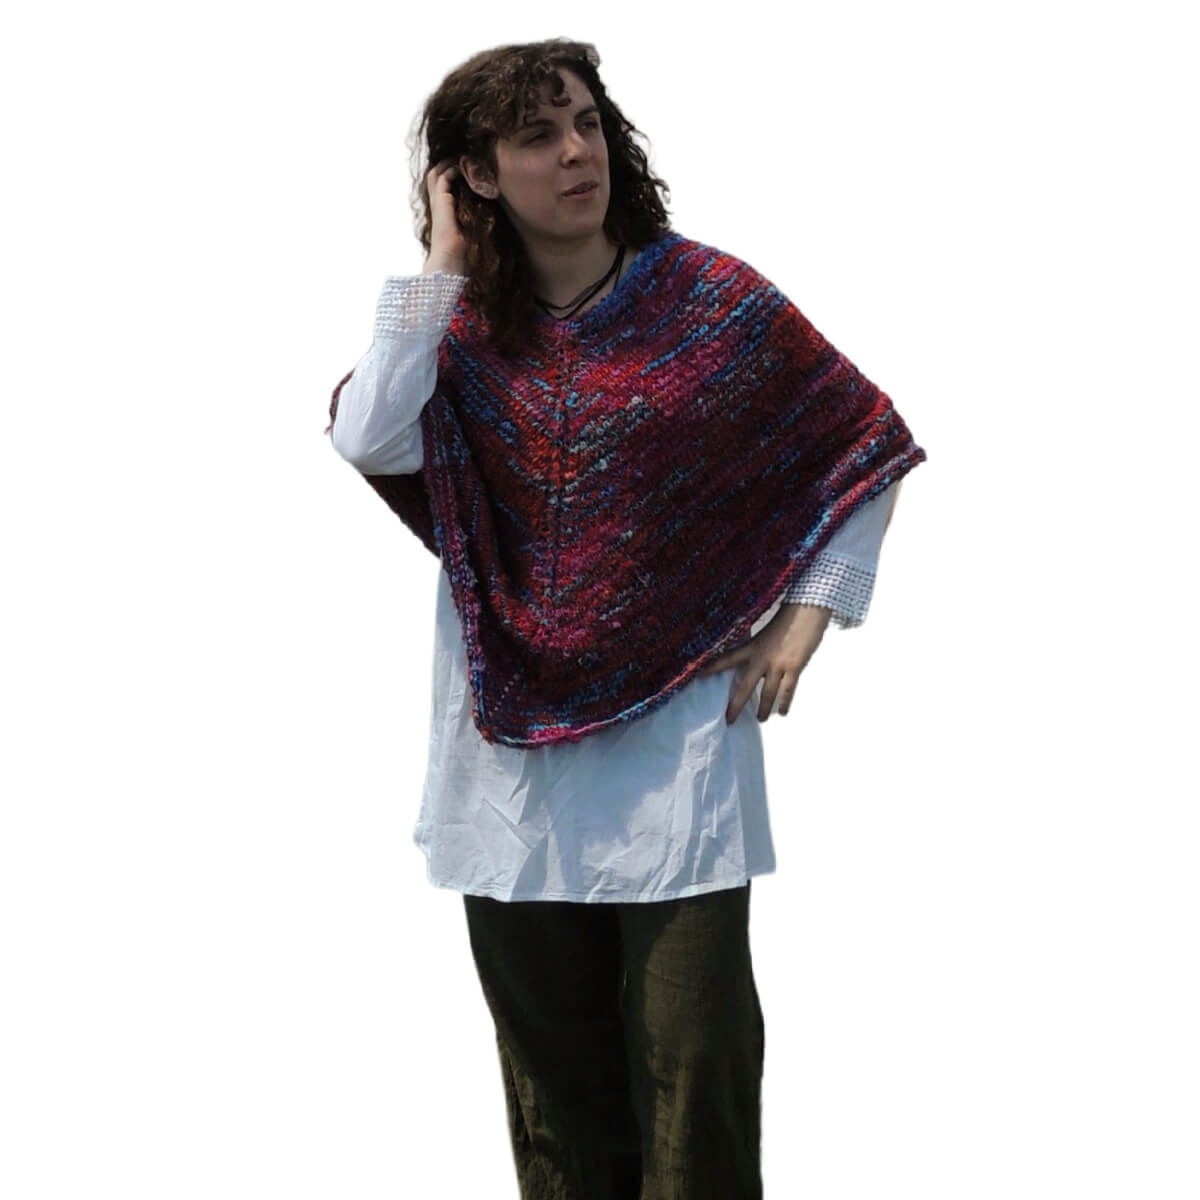 Front view of a young woman with curly hair wearing a white blouse, black pants and a classic poncho with points in the front and back. The poncho is knit with yarn that's mostly scarlet with short lines of blues and pinks. She has one hand on her hip and the other on the side of her head.